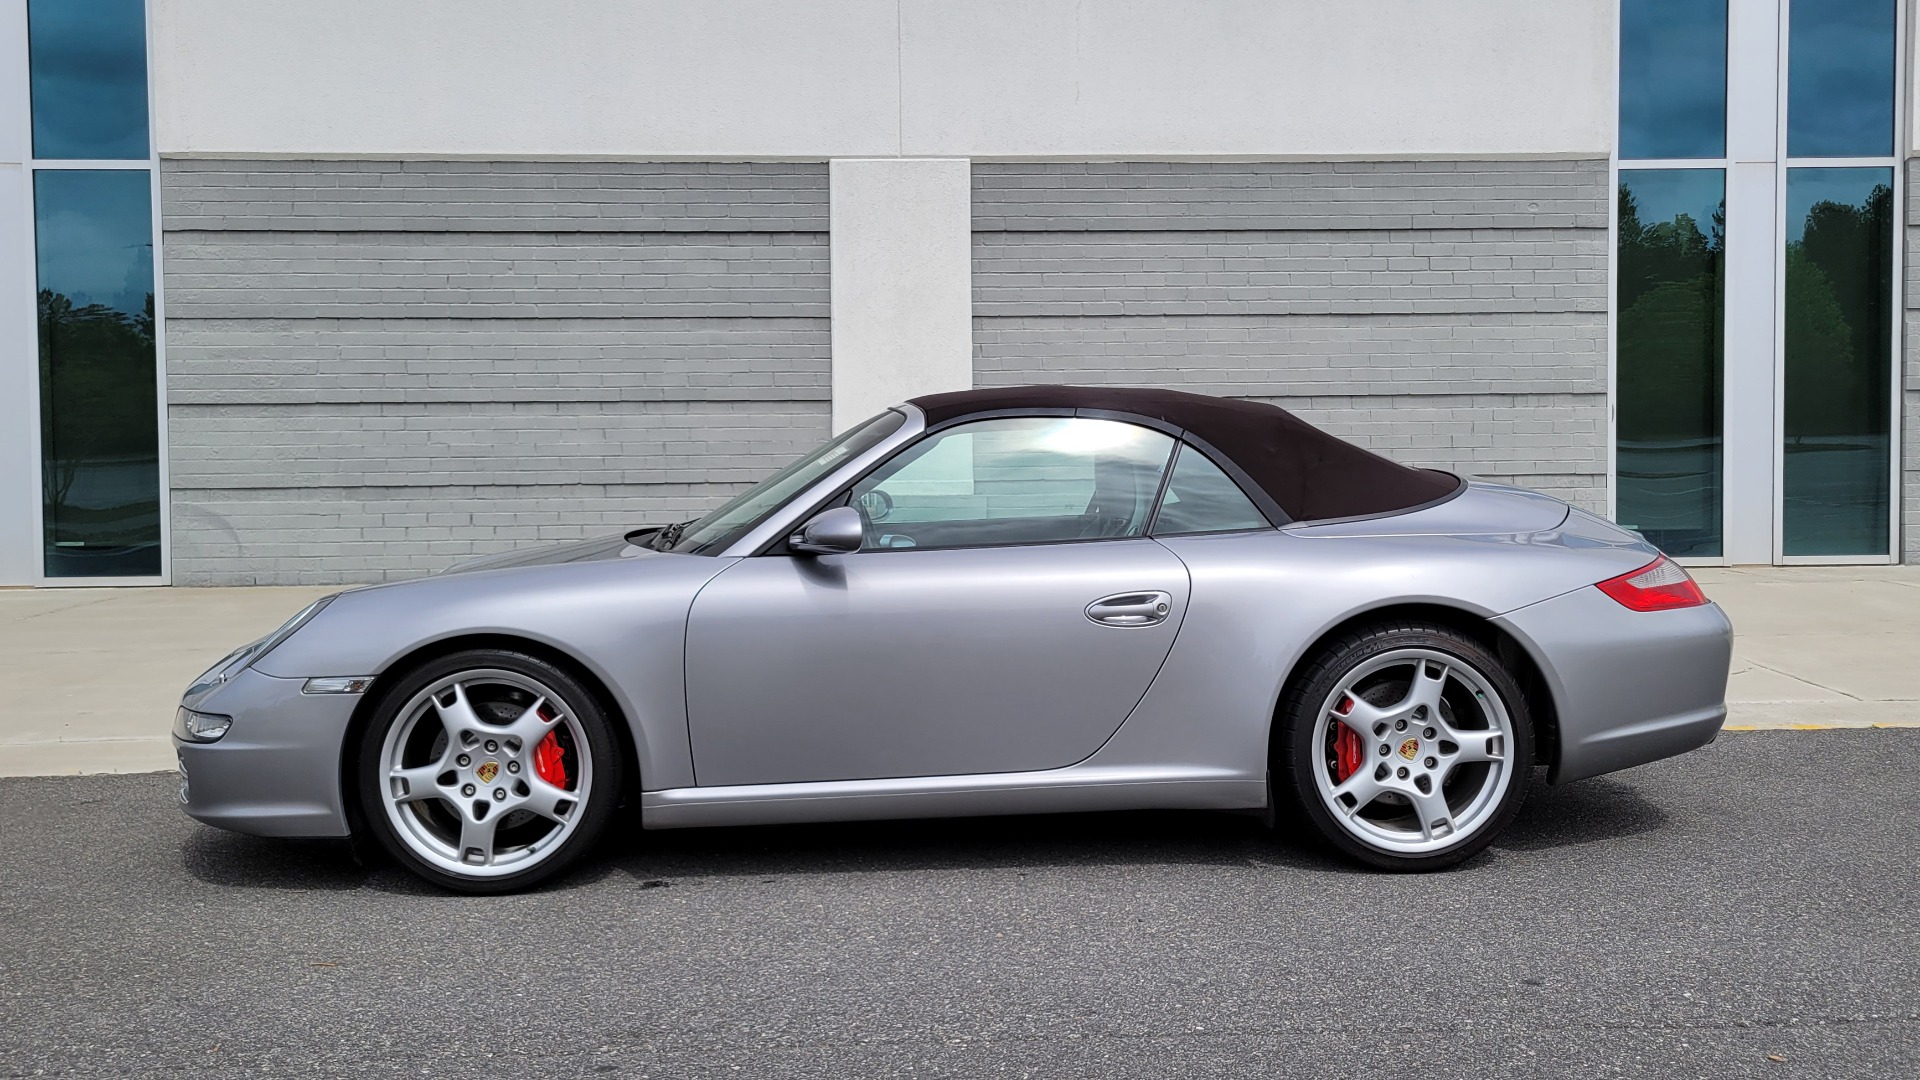 Used 2006 Porsche 911 CARRERA S CABRIOLET / SPORT CHRONO / BOSE / SPORT SEATS / SPORT SHIFTER for sale $62,999 at Formula Imports in Charlotte NC 28227 9